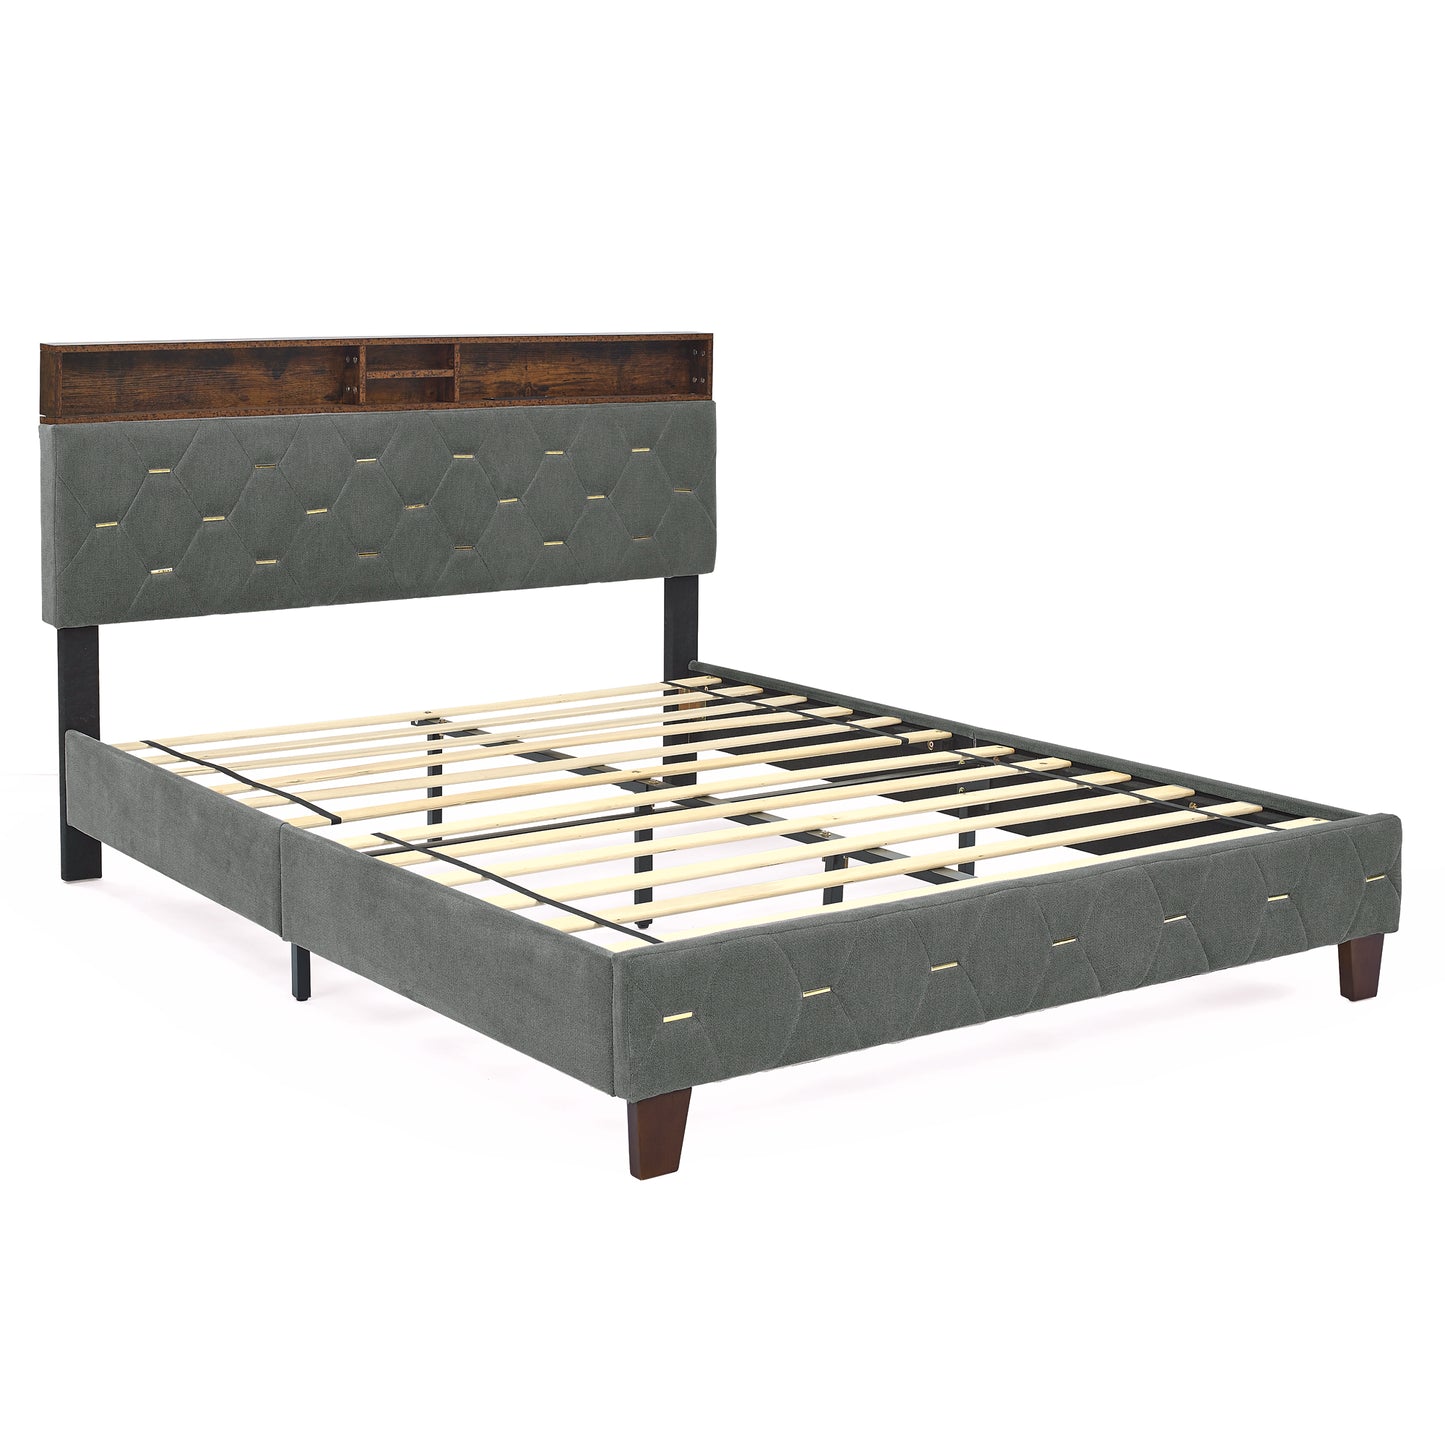 Queen Size Bed Frame, Shelf Upholstered Headboard, Platform Bed with Outlet & USB Ports, Wood Legs, No Box Spring Needed, Easy Assembly, Grey